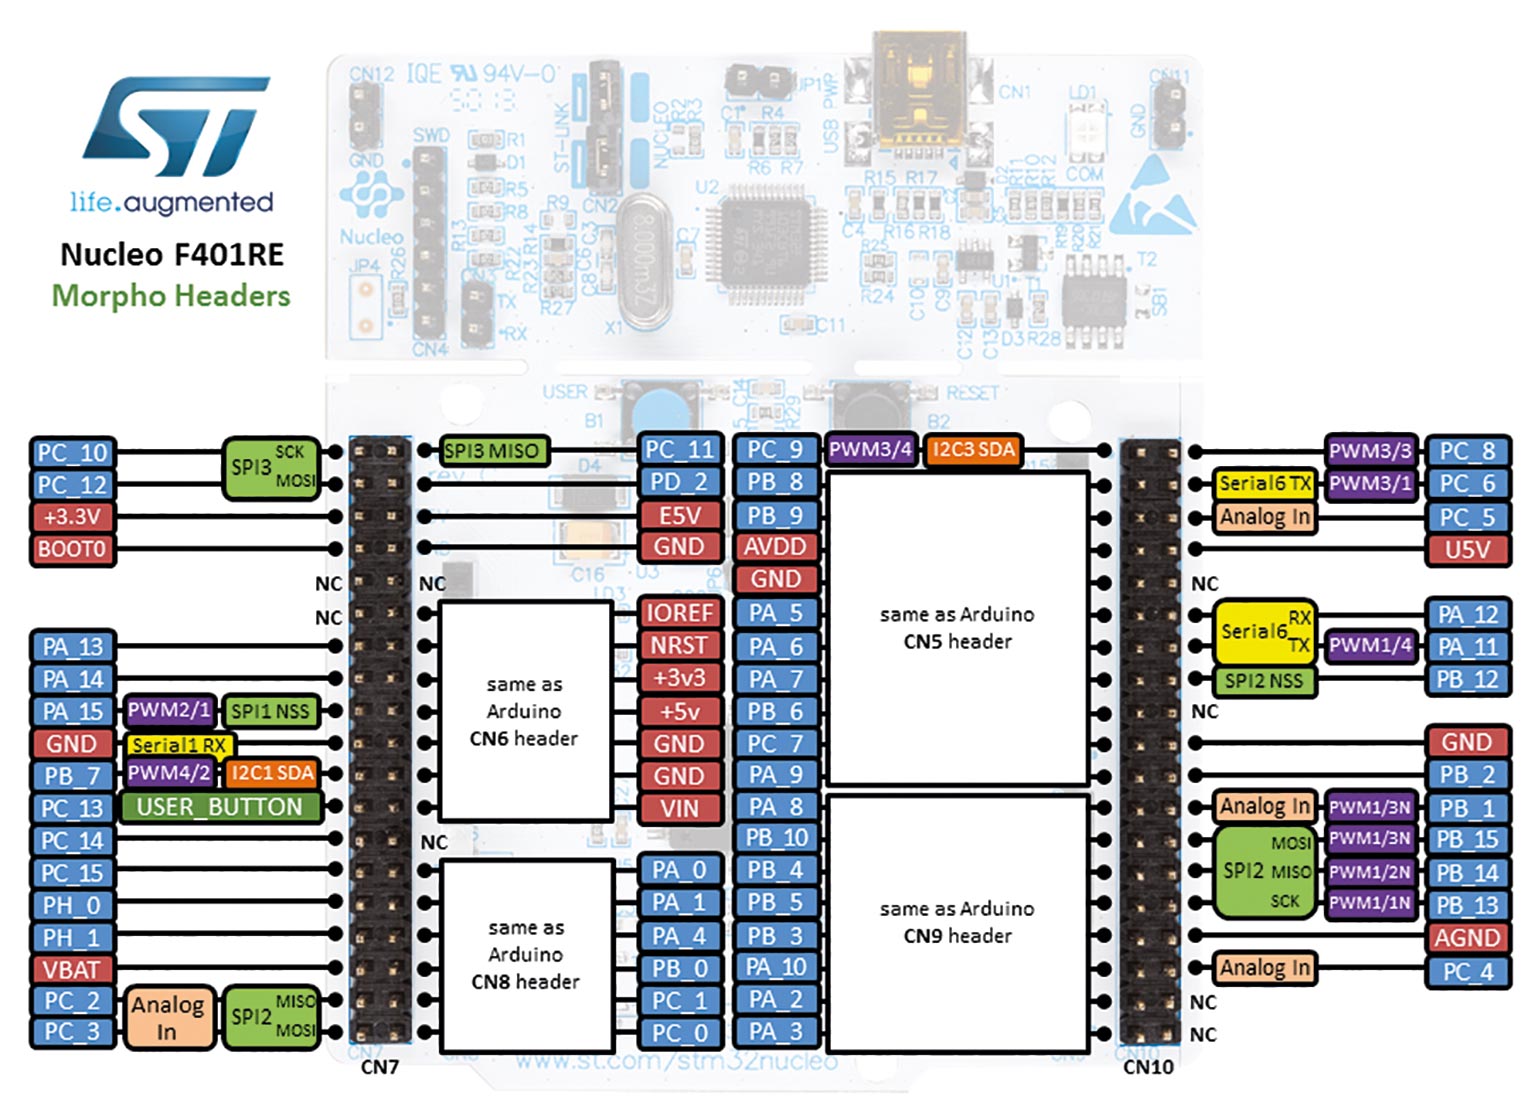 With the STM32 into the Internet of Things